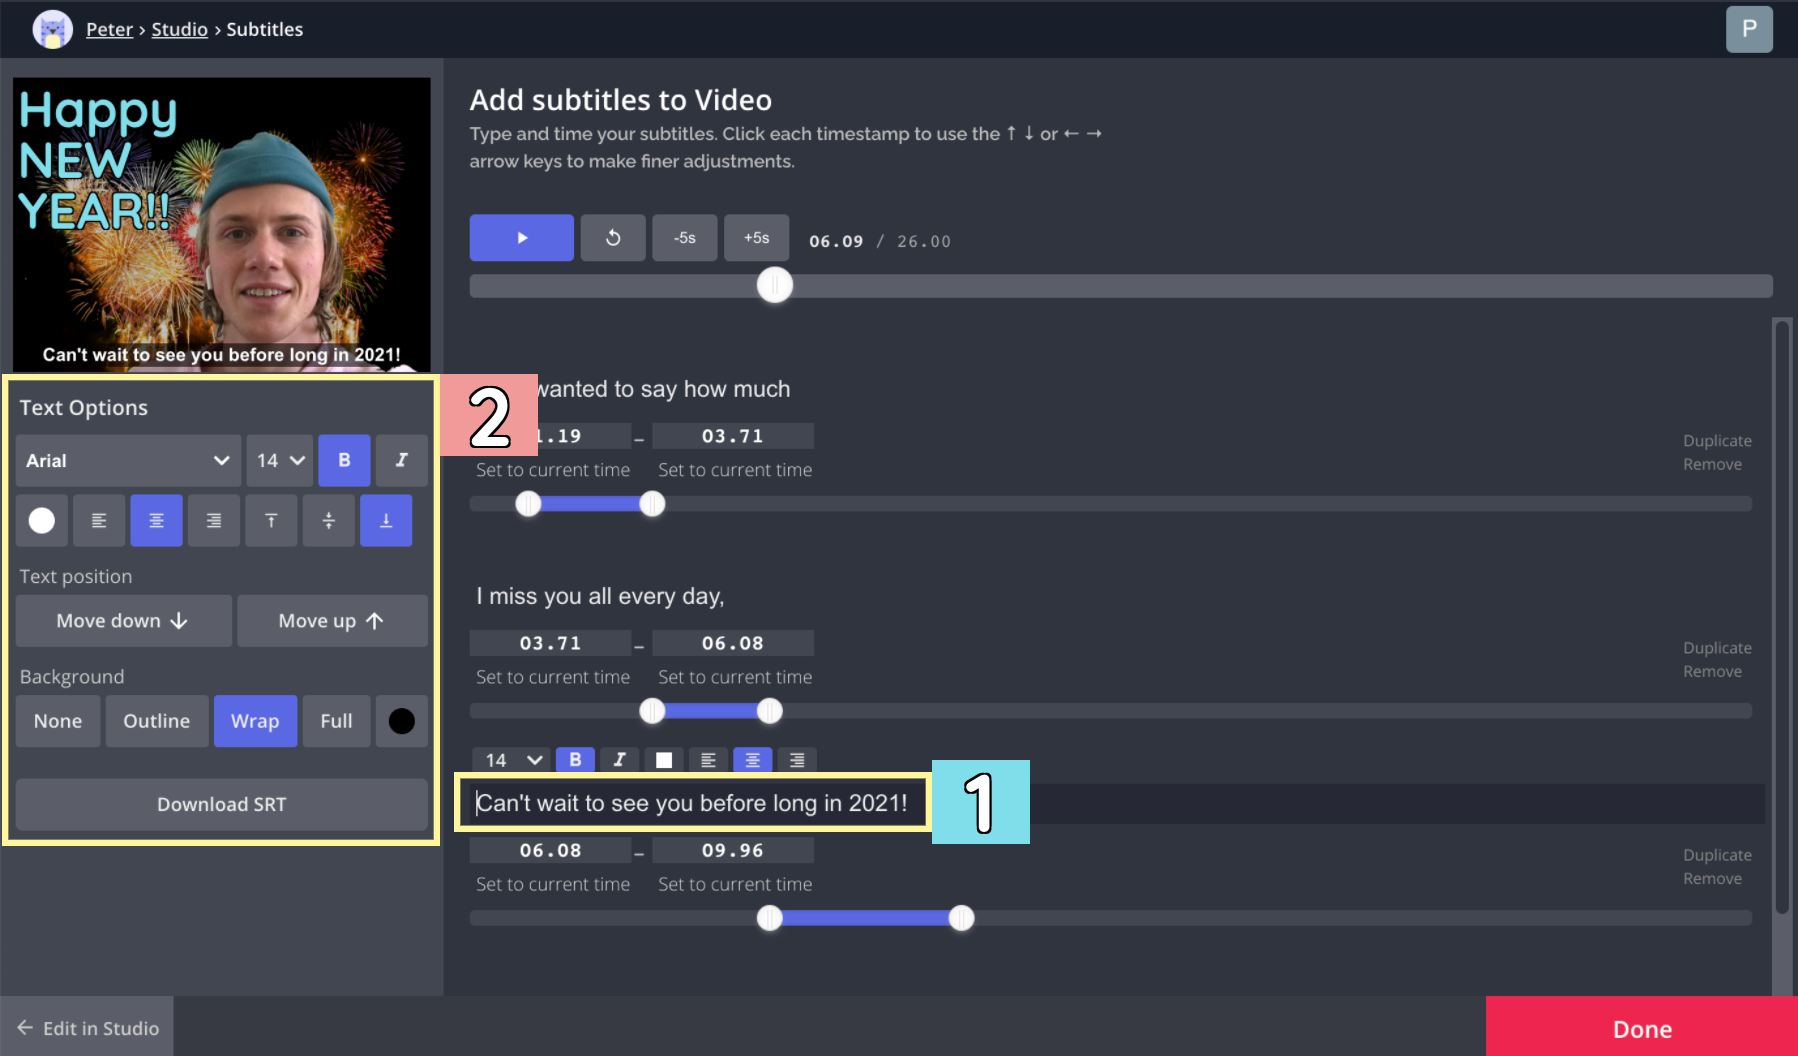 A screenshot showing how to add and edit subtitles in the Studio. 